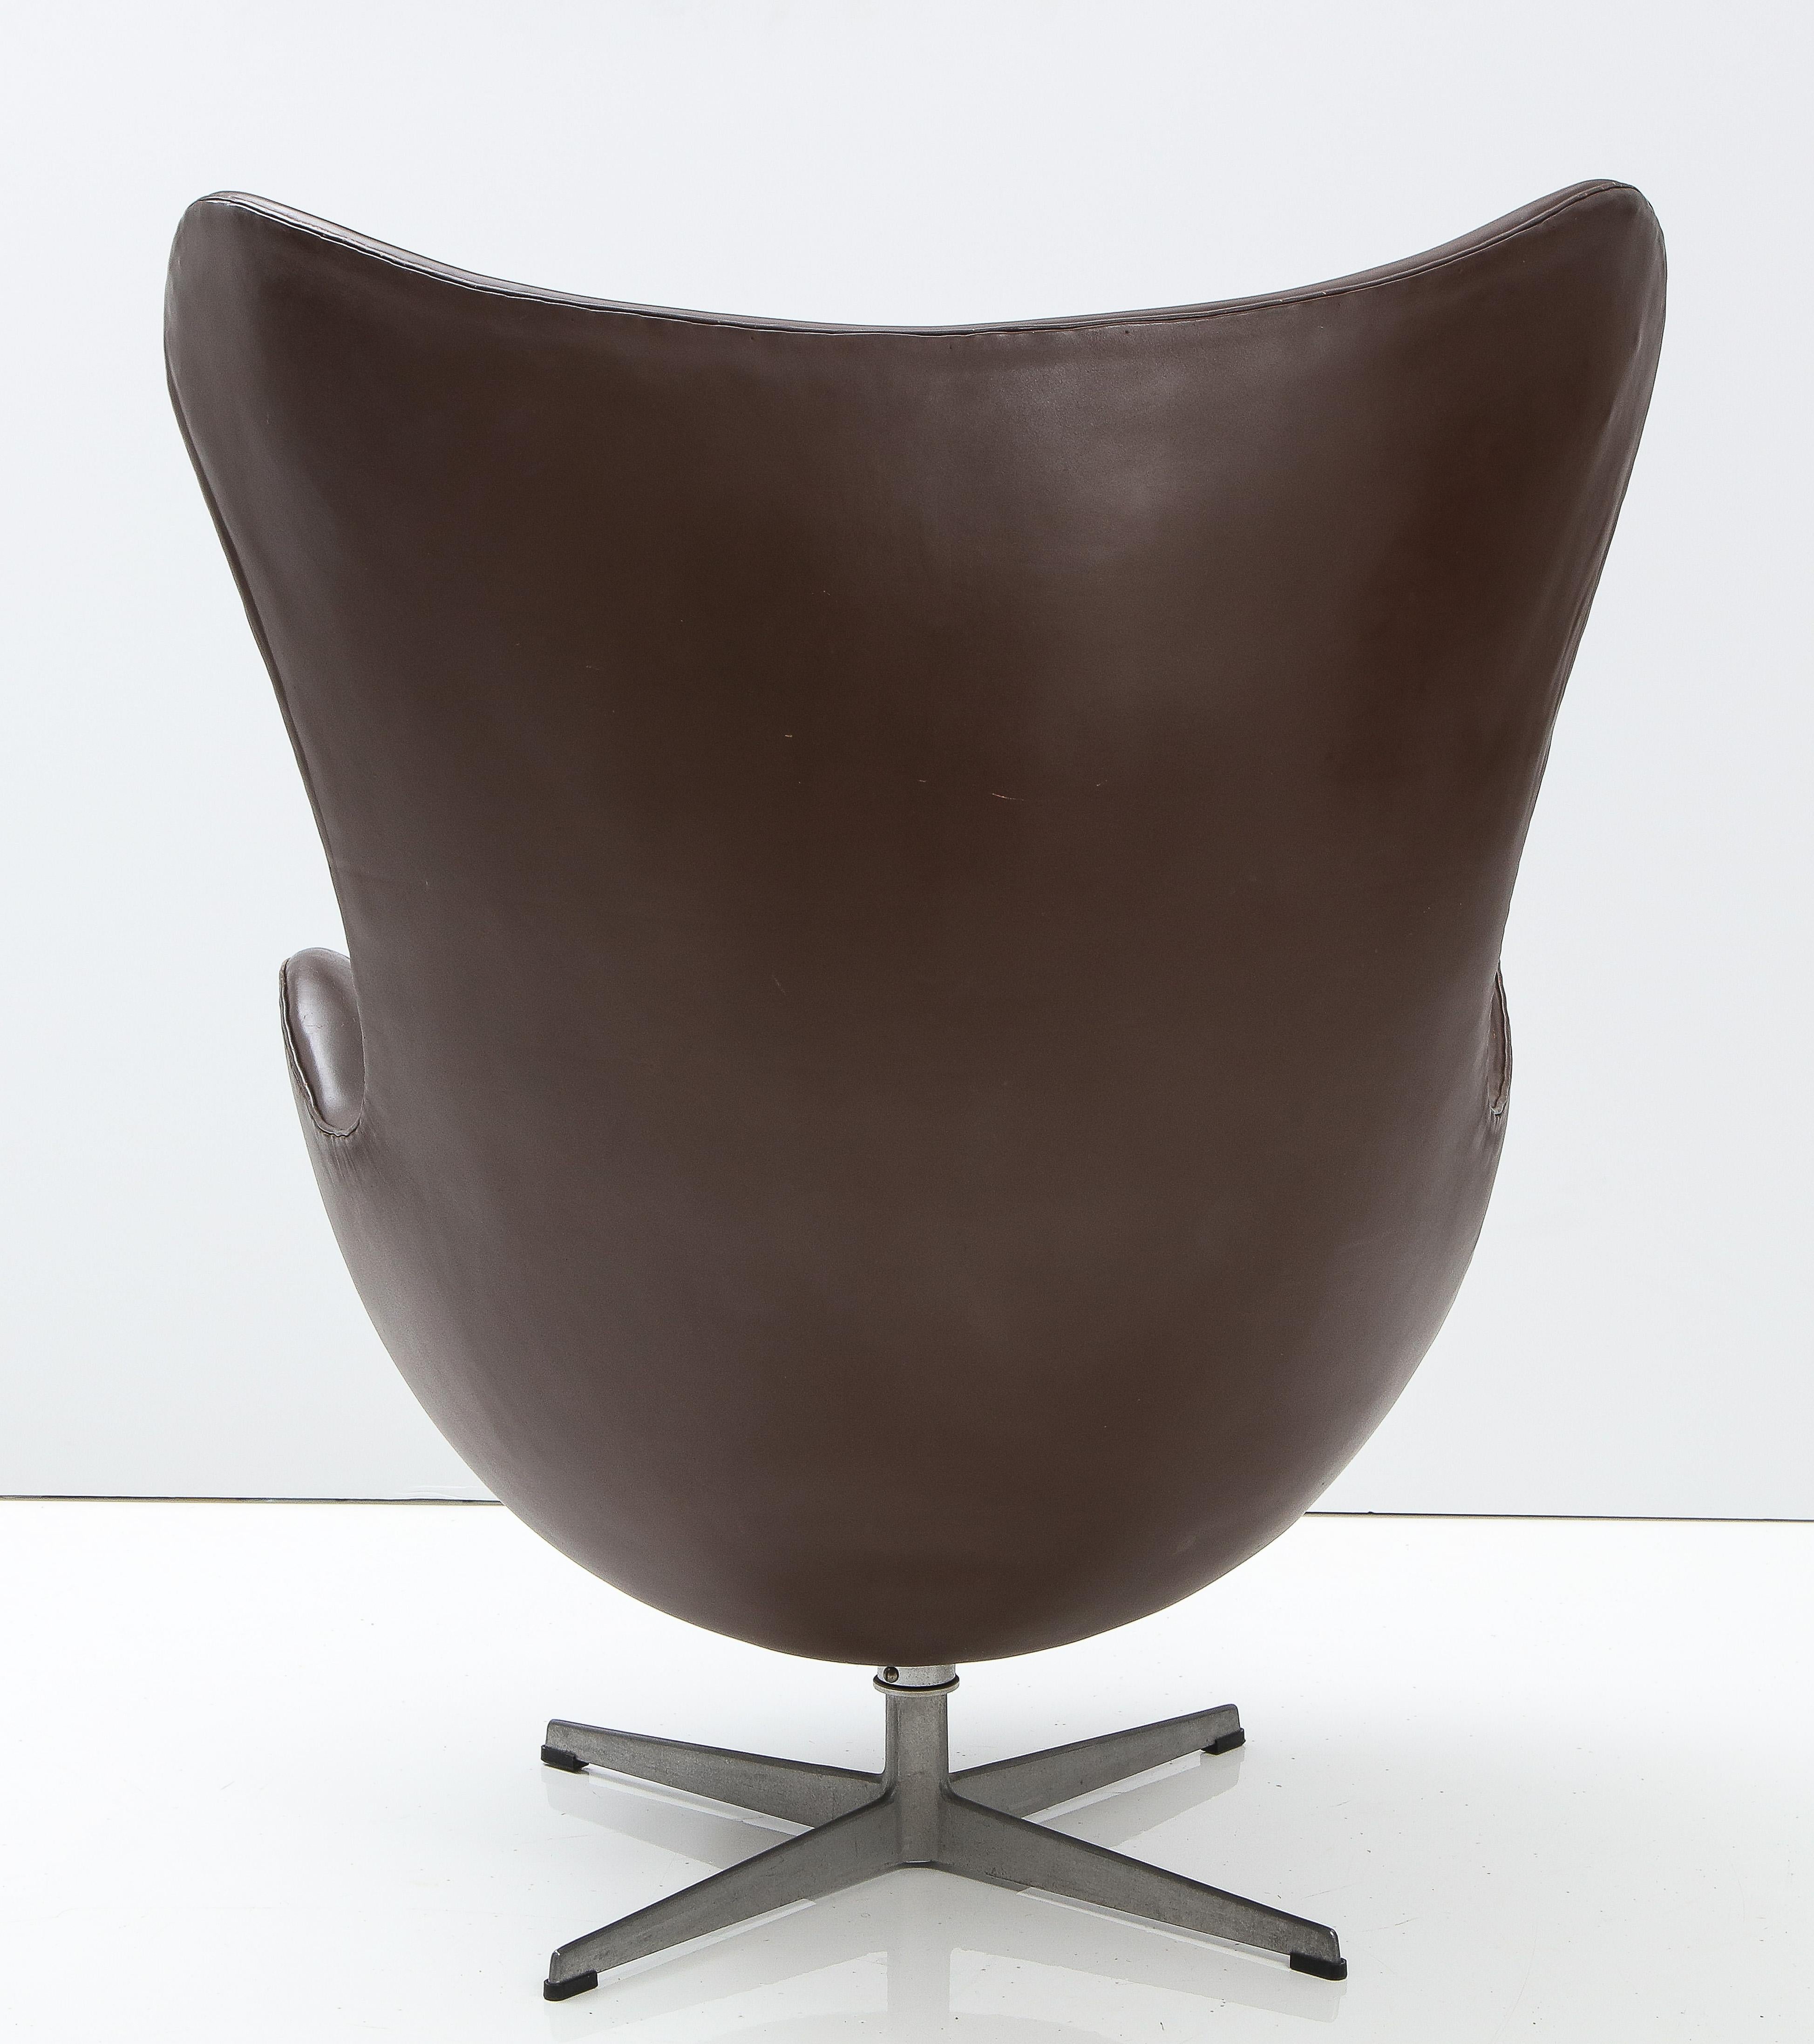 Arne Jacobson 'Egg' Chair and Ottoman, Original Leather for Fritz Hansen, 1976 For Sale 3